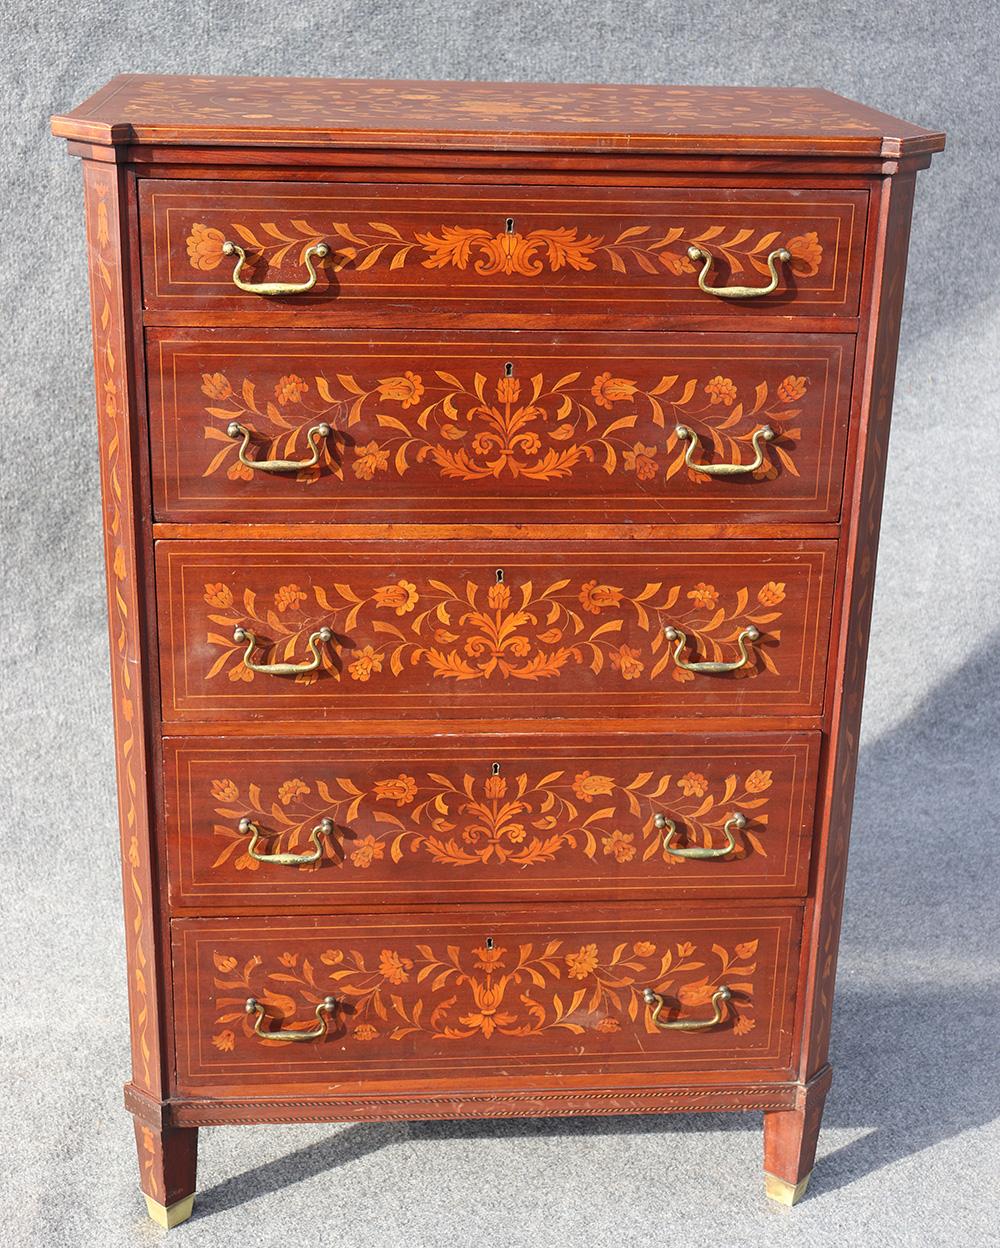 This gorgeous 5-drawer tall dresser was made circa 1900-1910 and looks like RJ Horner of New York. The Dutch Marquetry case is just beautifully inlaid.